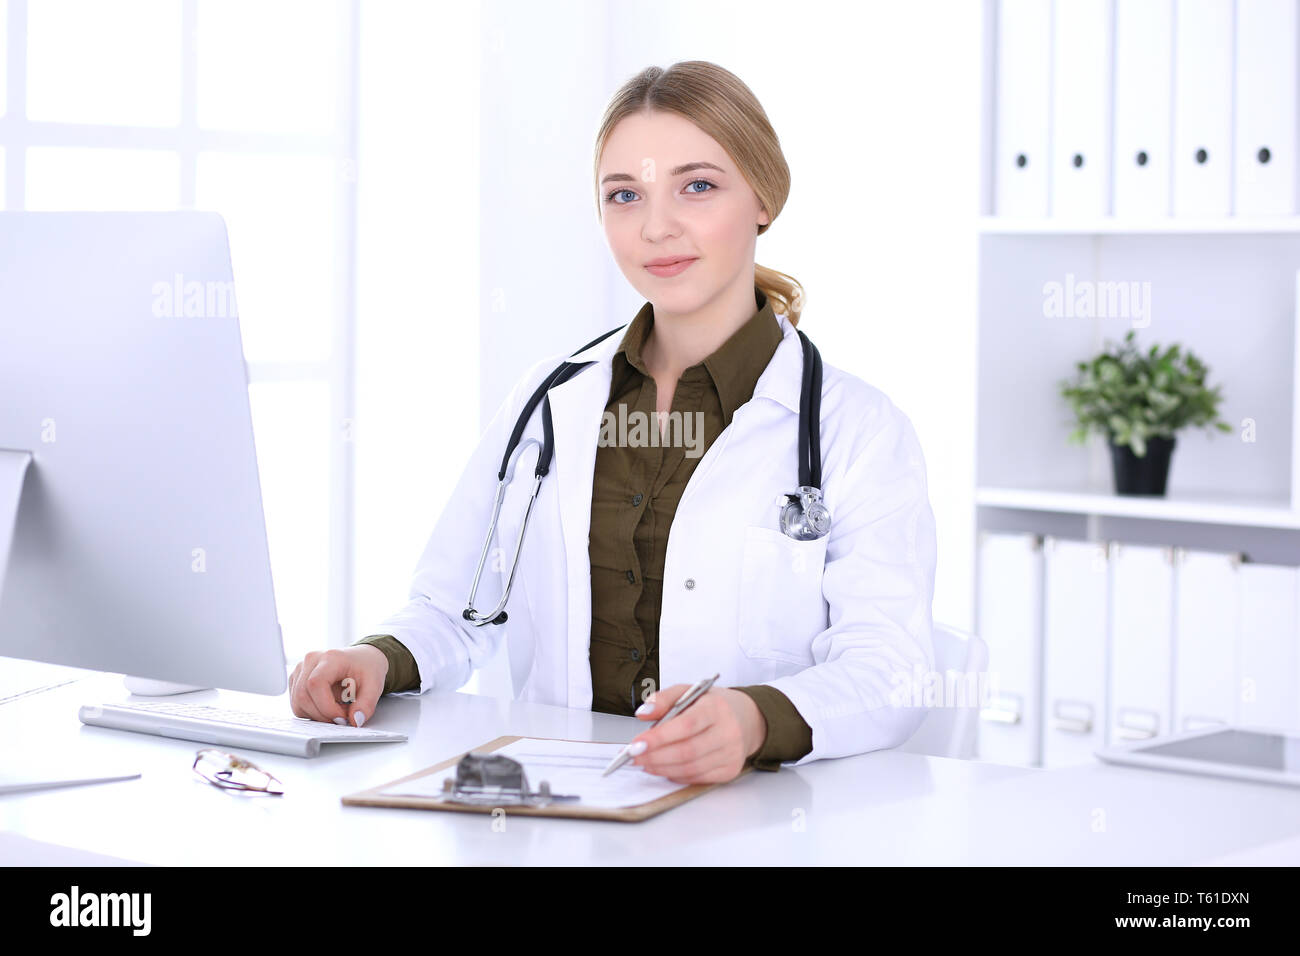 Young woman doctor at work in hospital looking at desktop pc monitor. Physician controls medication history records and exam results. Medicine and Stock Photo